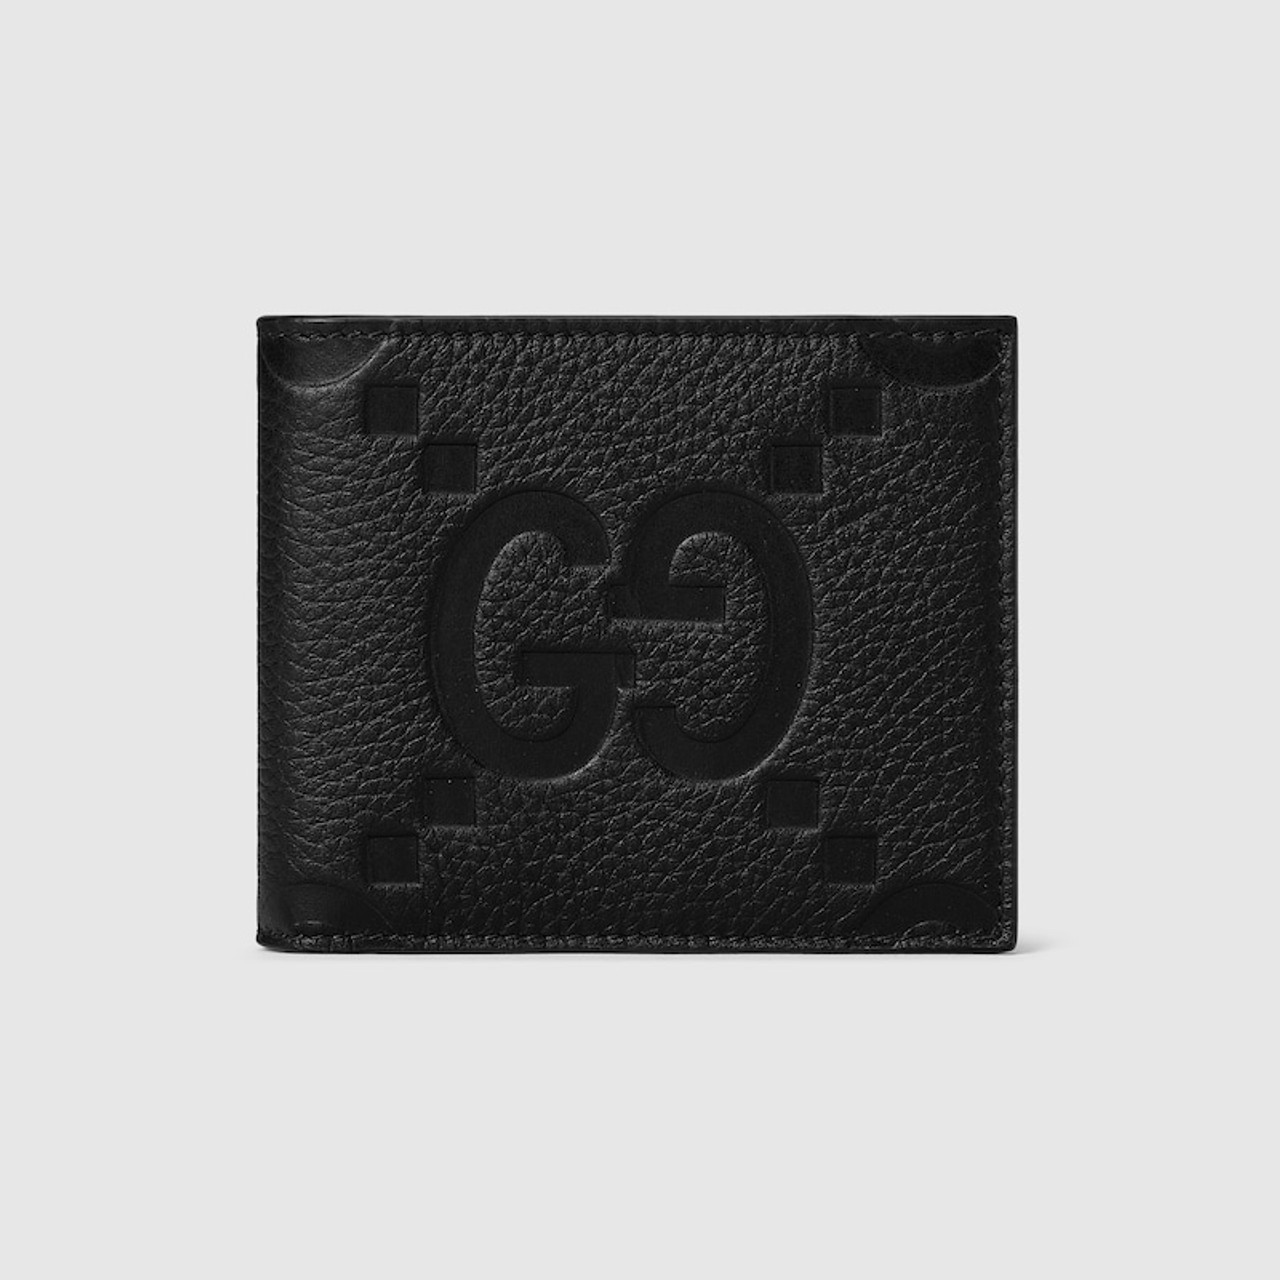 Gucci Microguccissima Zip Around Wallet Small Black in Leather - US